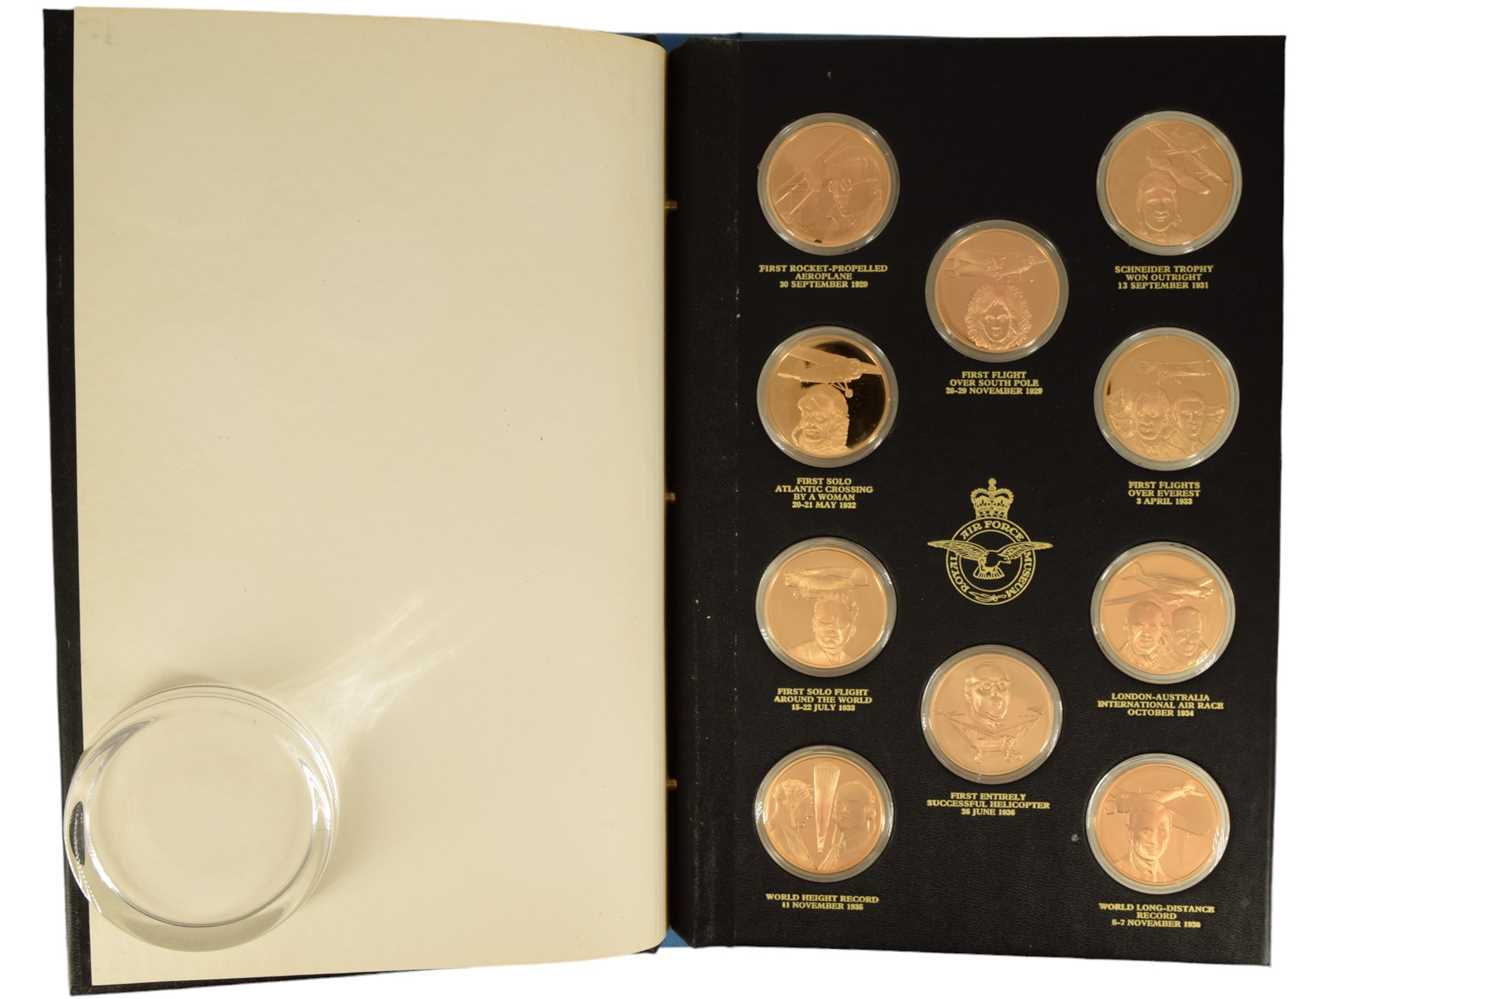 The History of Man in Flight bronze medal album for The Royal Airforce Museum by Franklin Mint Ltd - Image 12 of 15